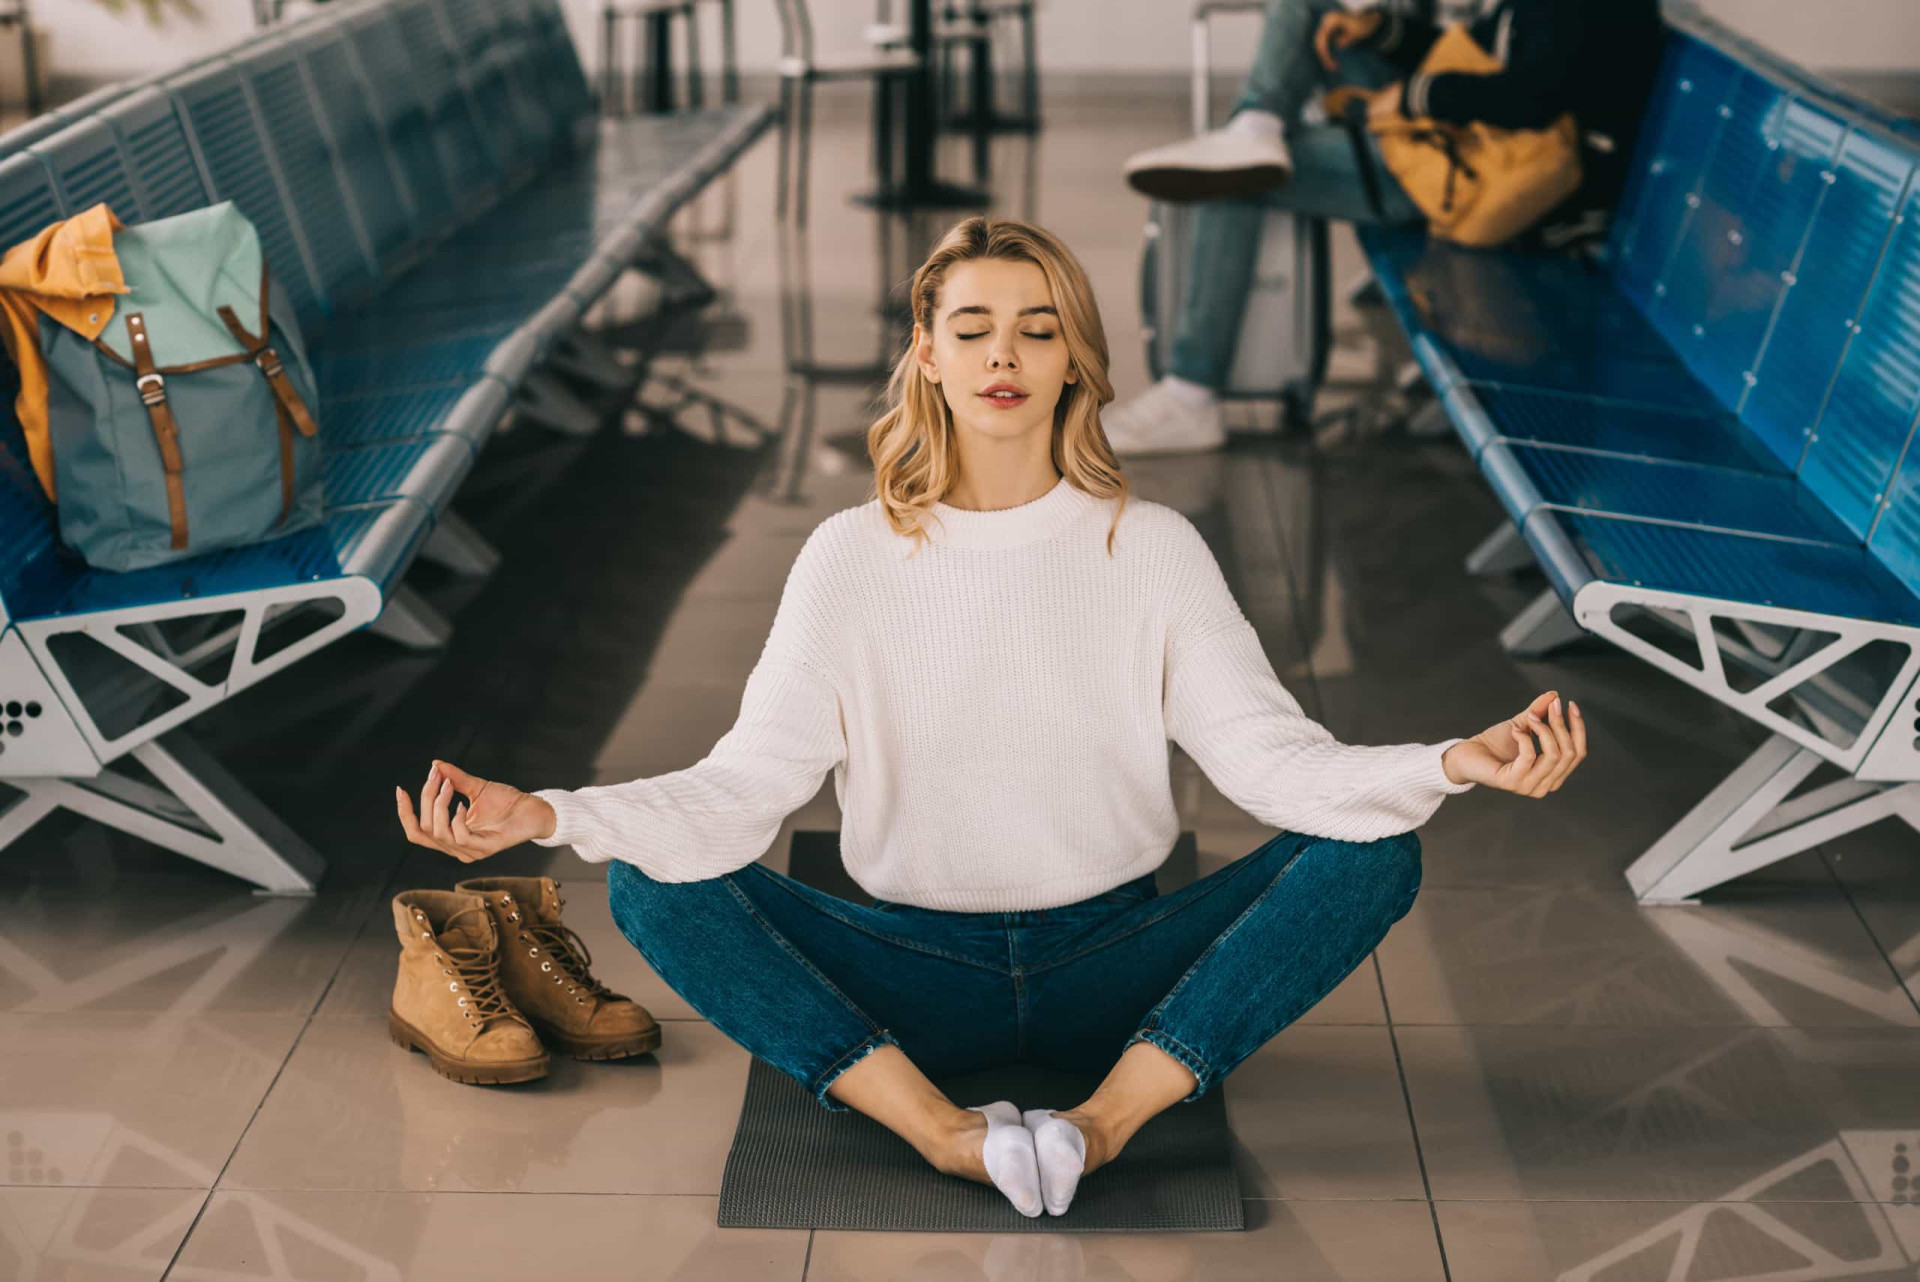 <p>Whether it's meditation, listening to some calming music, or doing some breathing exercises, these are all techniques that will help you sleep more easily and put your mind at ease.</p><p><a href="https://www.msn.com/en-us/community/channel/vid-7xx8mnucu55yw63we9va2gwr7uihbxwc68fxqp25x6tg4ftibpra?cvid=94631541bc0f4f89bfd59158d696ad7e">Follow us and access great exclusive content every day</a></p>